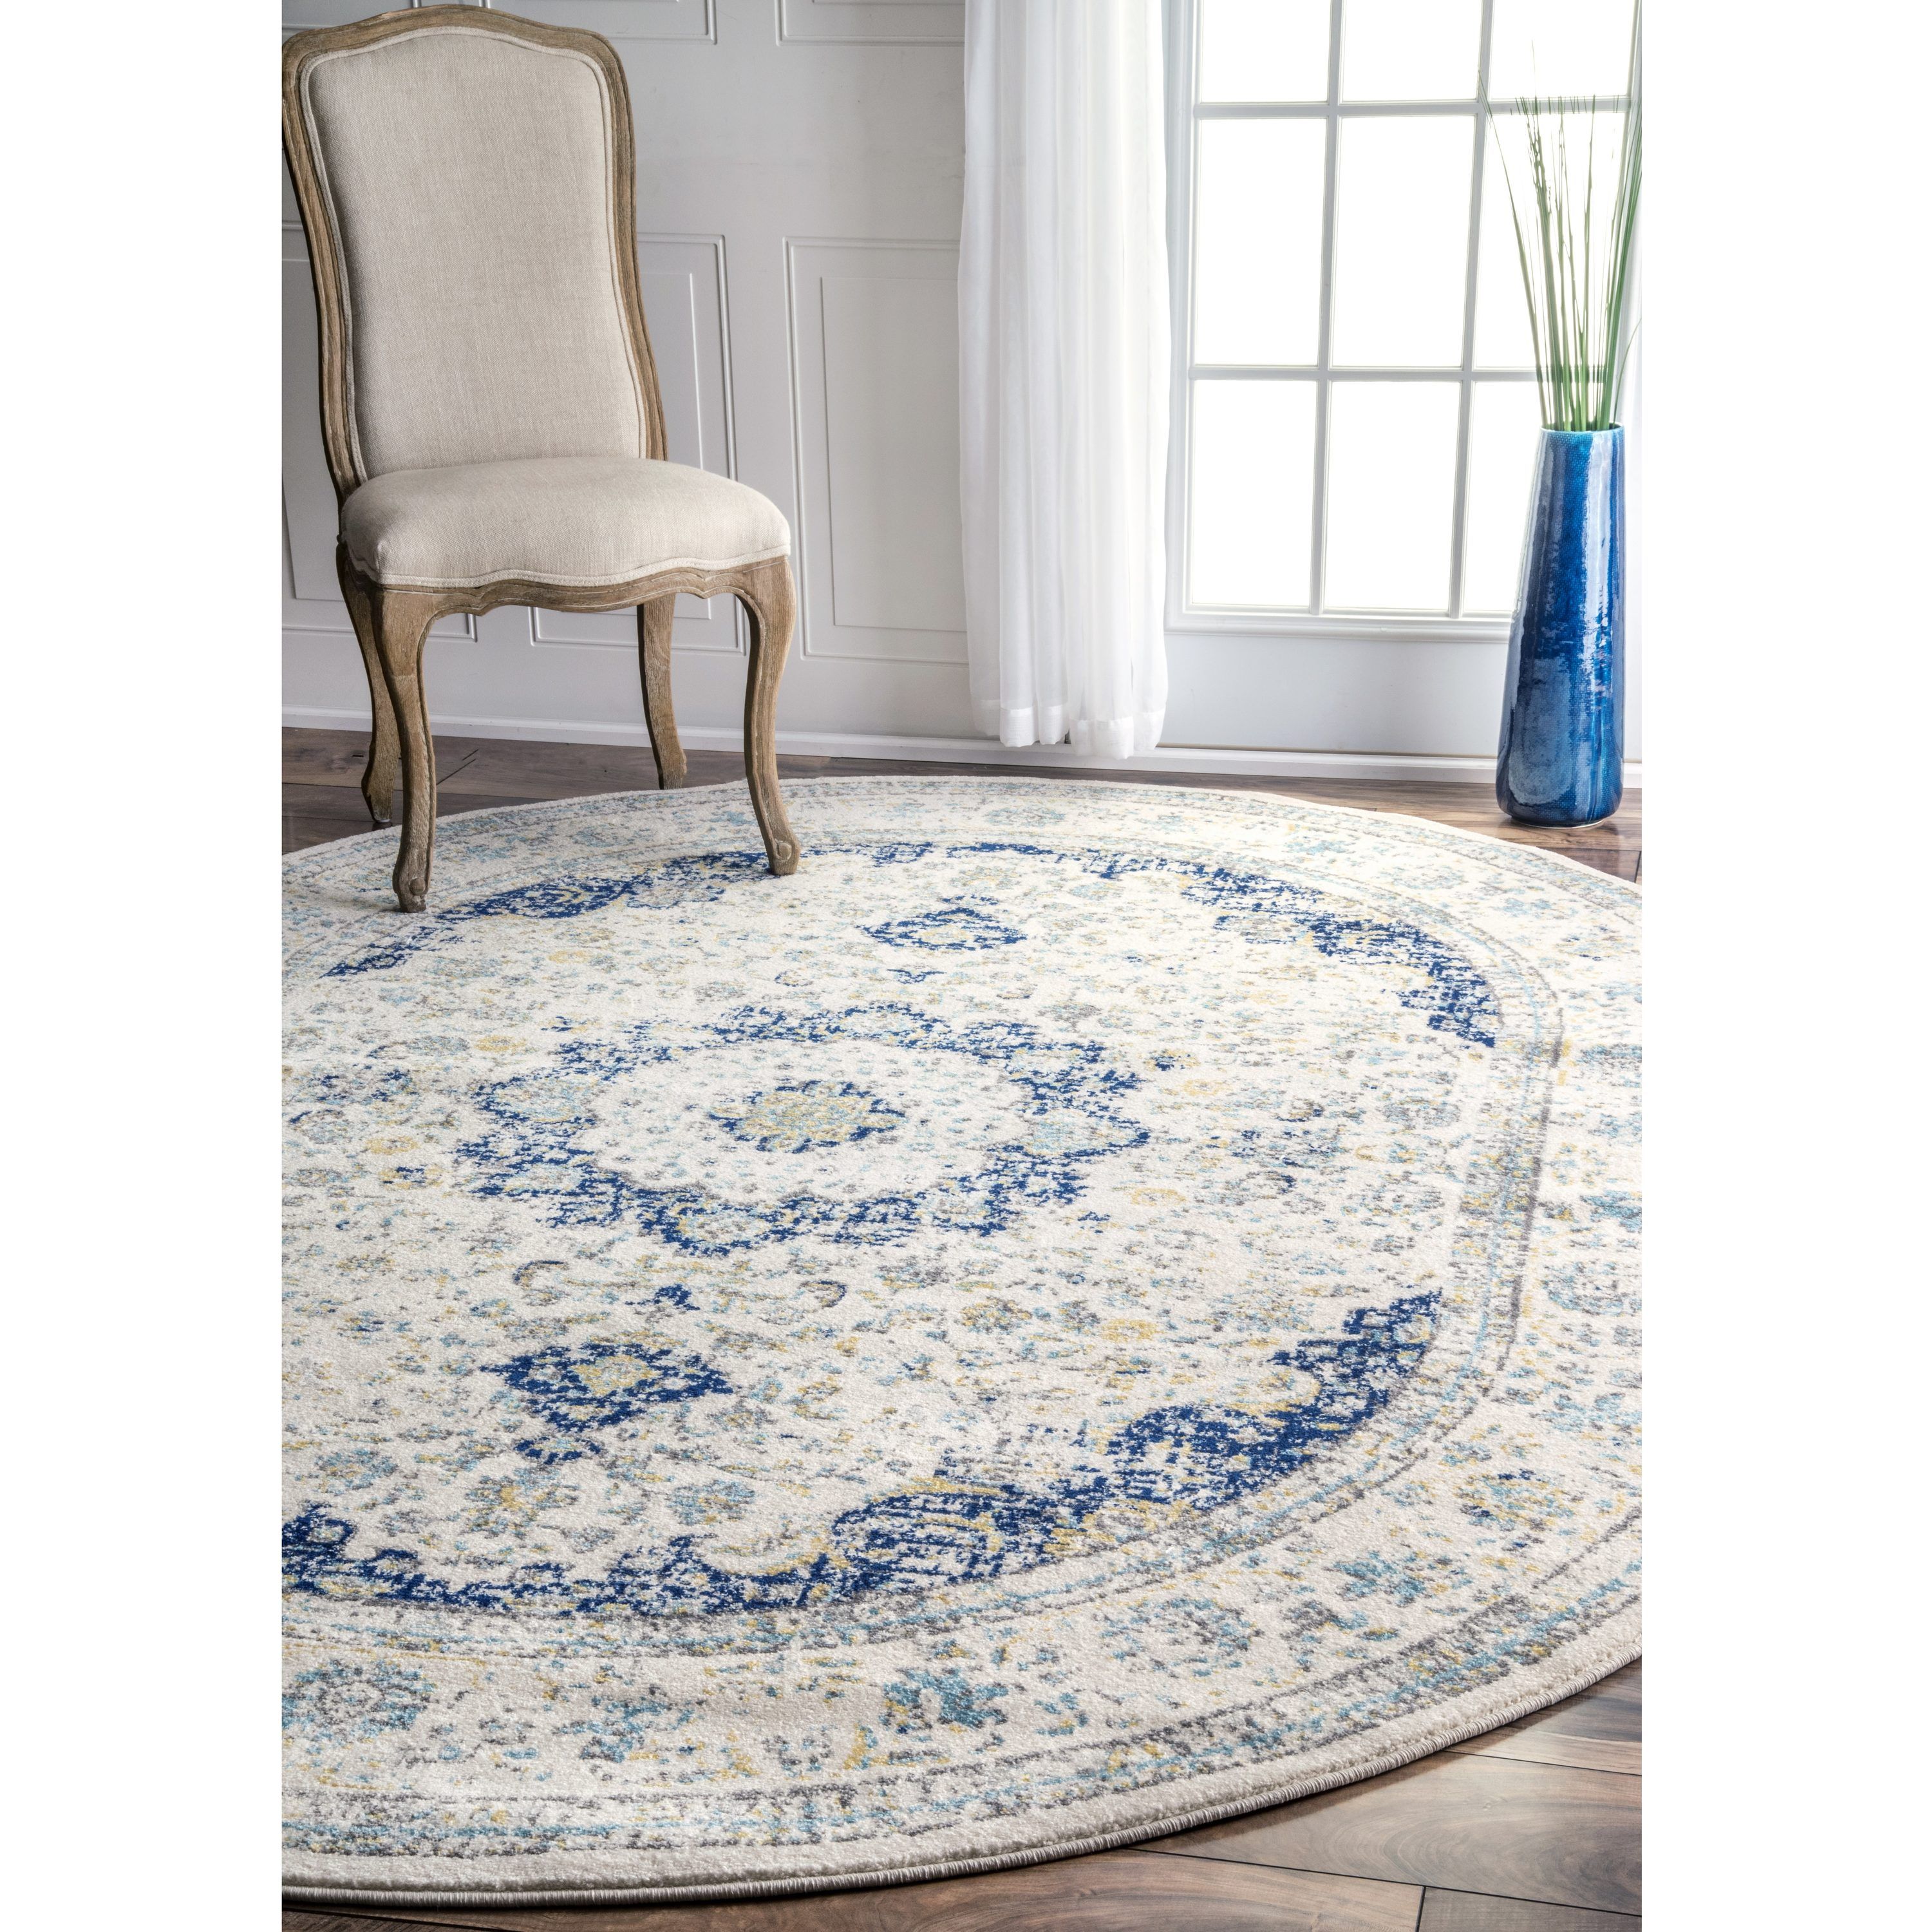 Nuloom 6 X 9 Blue Oval Indoor Distressed/overdyed Area Rug In The Rugs  Department At Lowes Regarding Blue Oval Rugs (Photo 2 of 15)